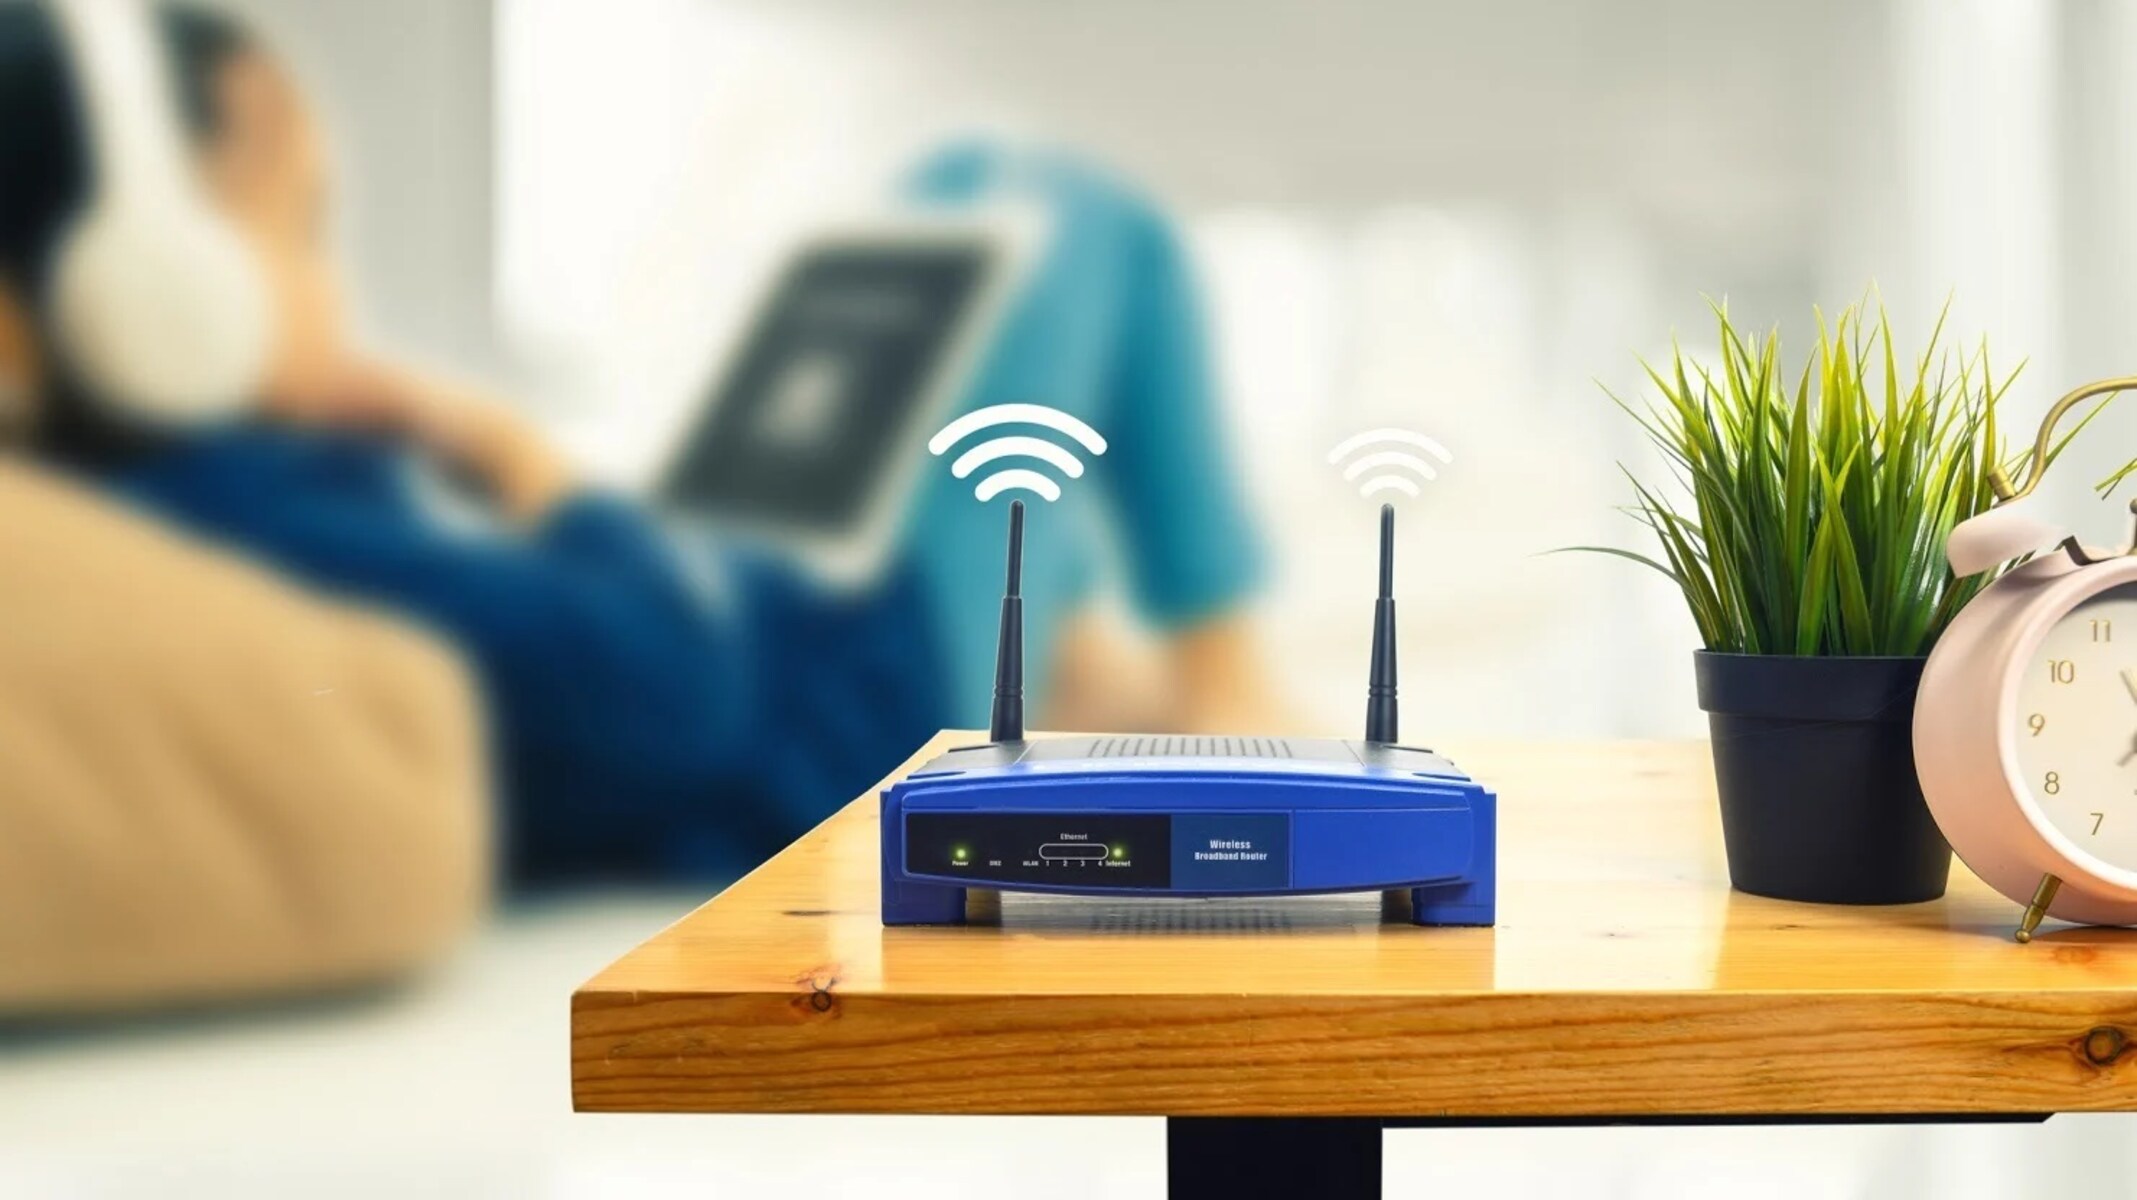 Find Out What Is Connected To My Wireless Router